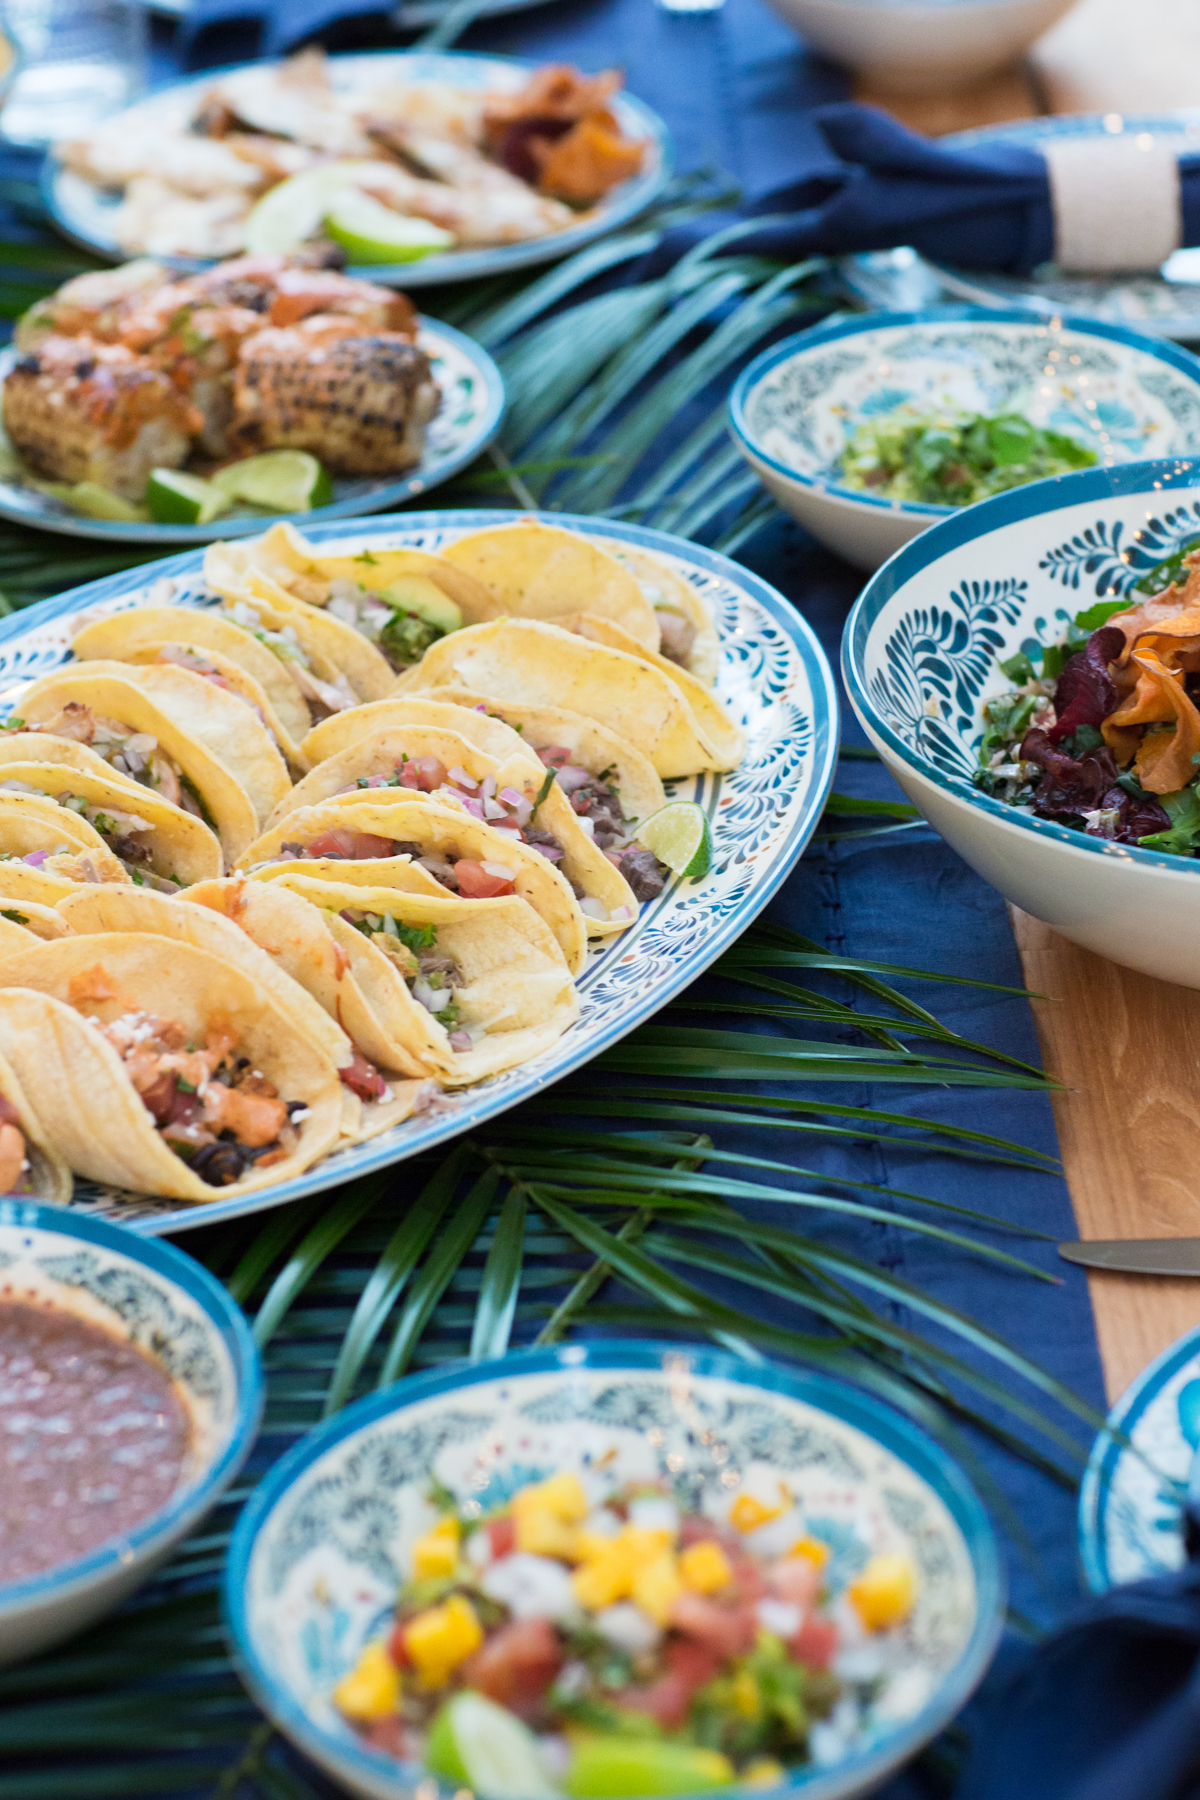 eatsleepwear, Kimberly Lapides, Outdoor Dining, Entertaning, Mexican, Williams-Sonoma, Williams-Sonoma Home